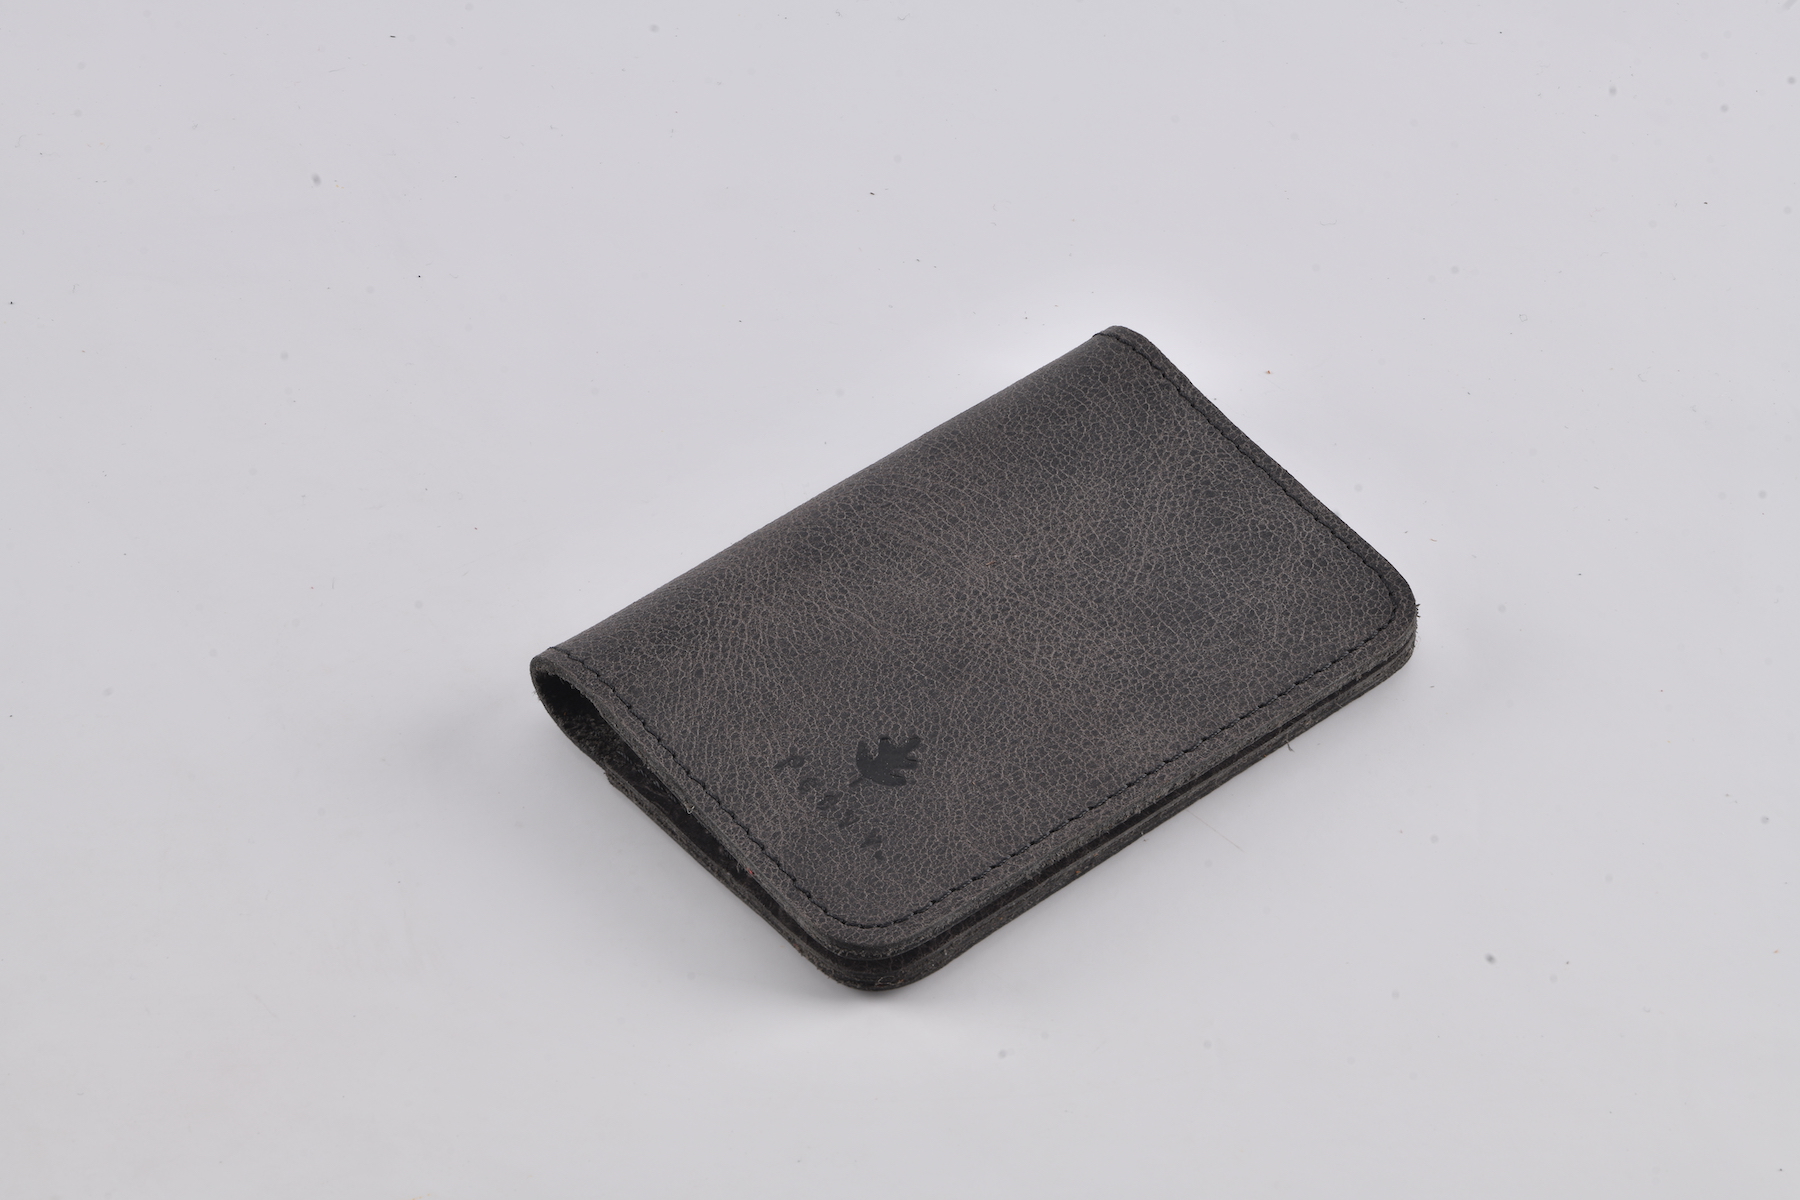 Amsterdam Wallet - Space Gray